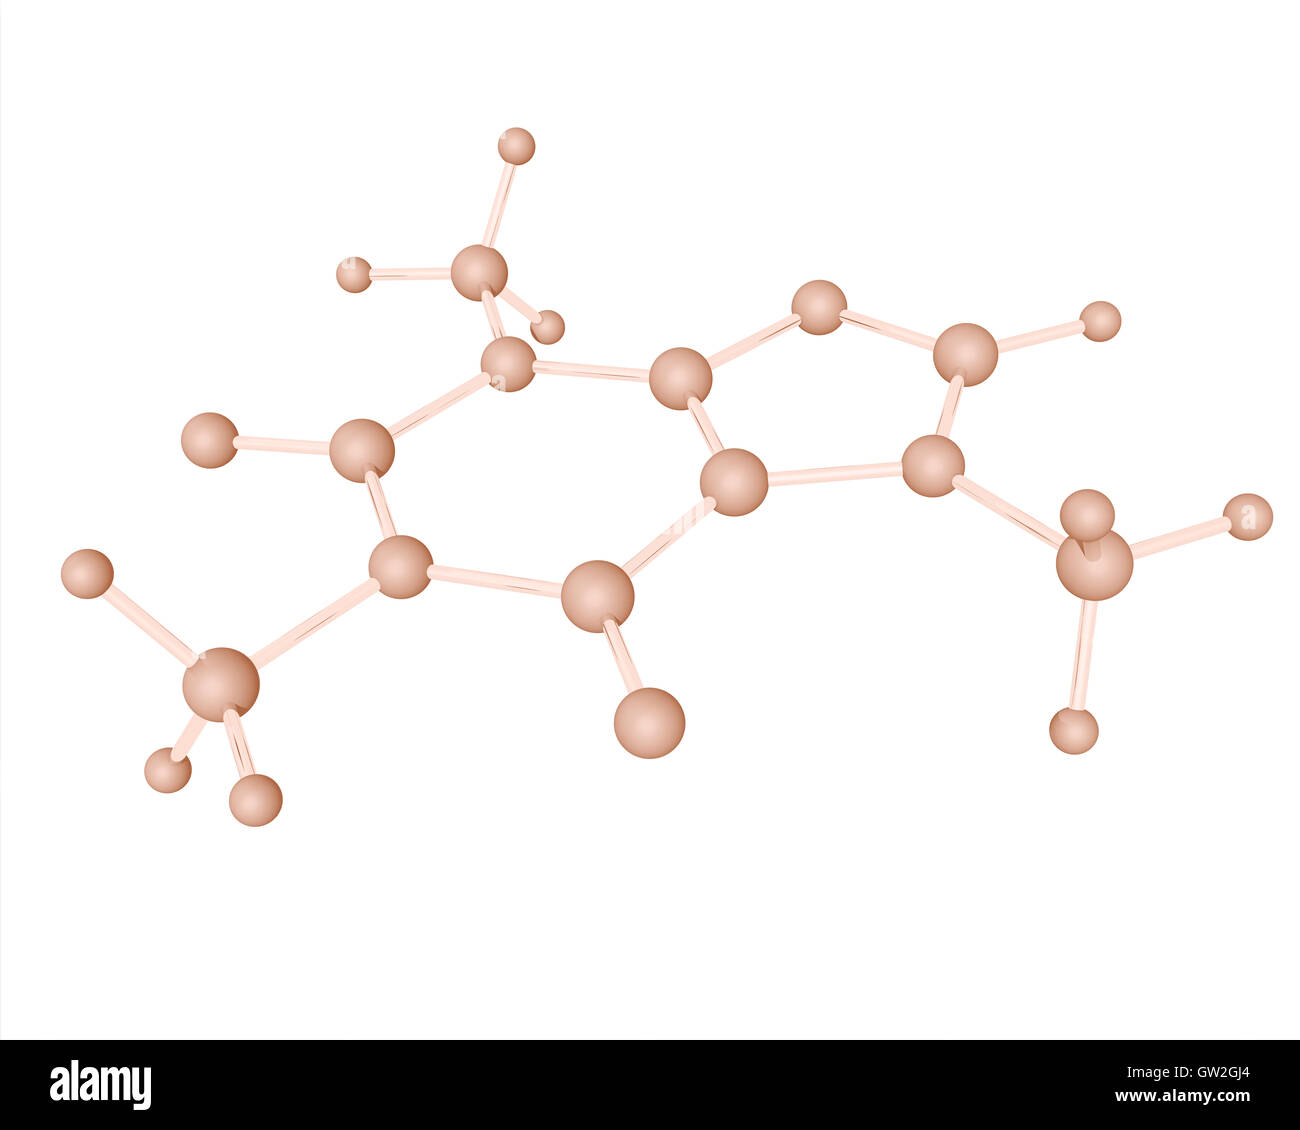 3D molecular model of caffeine-a central nervous system (CNS) stimulant of the methylxanthine class. Stock Photo